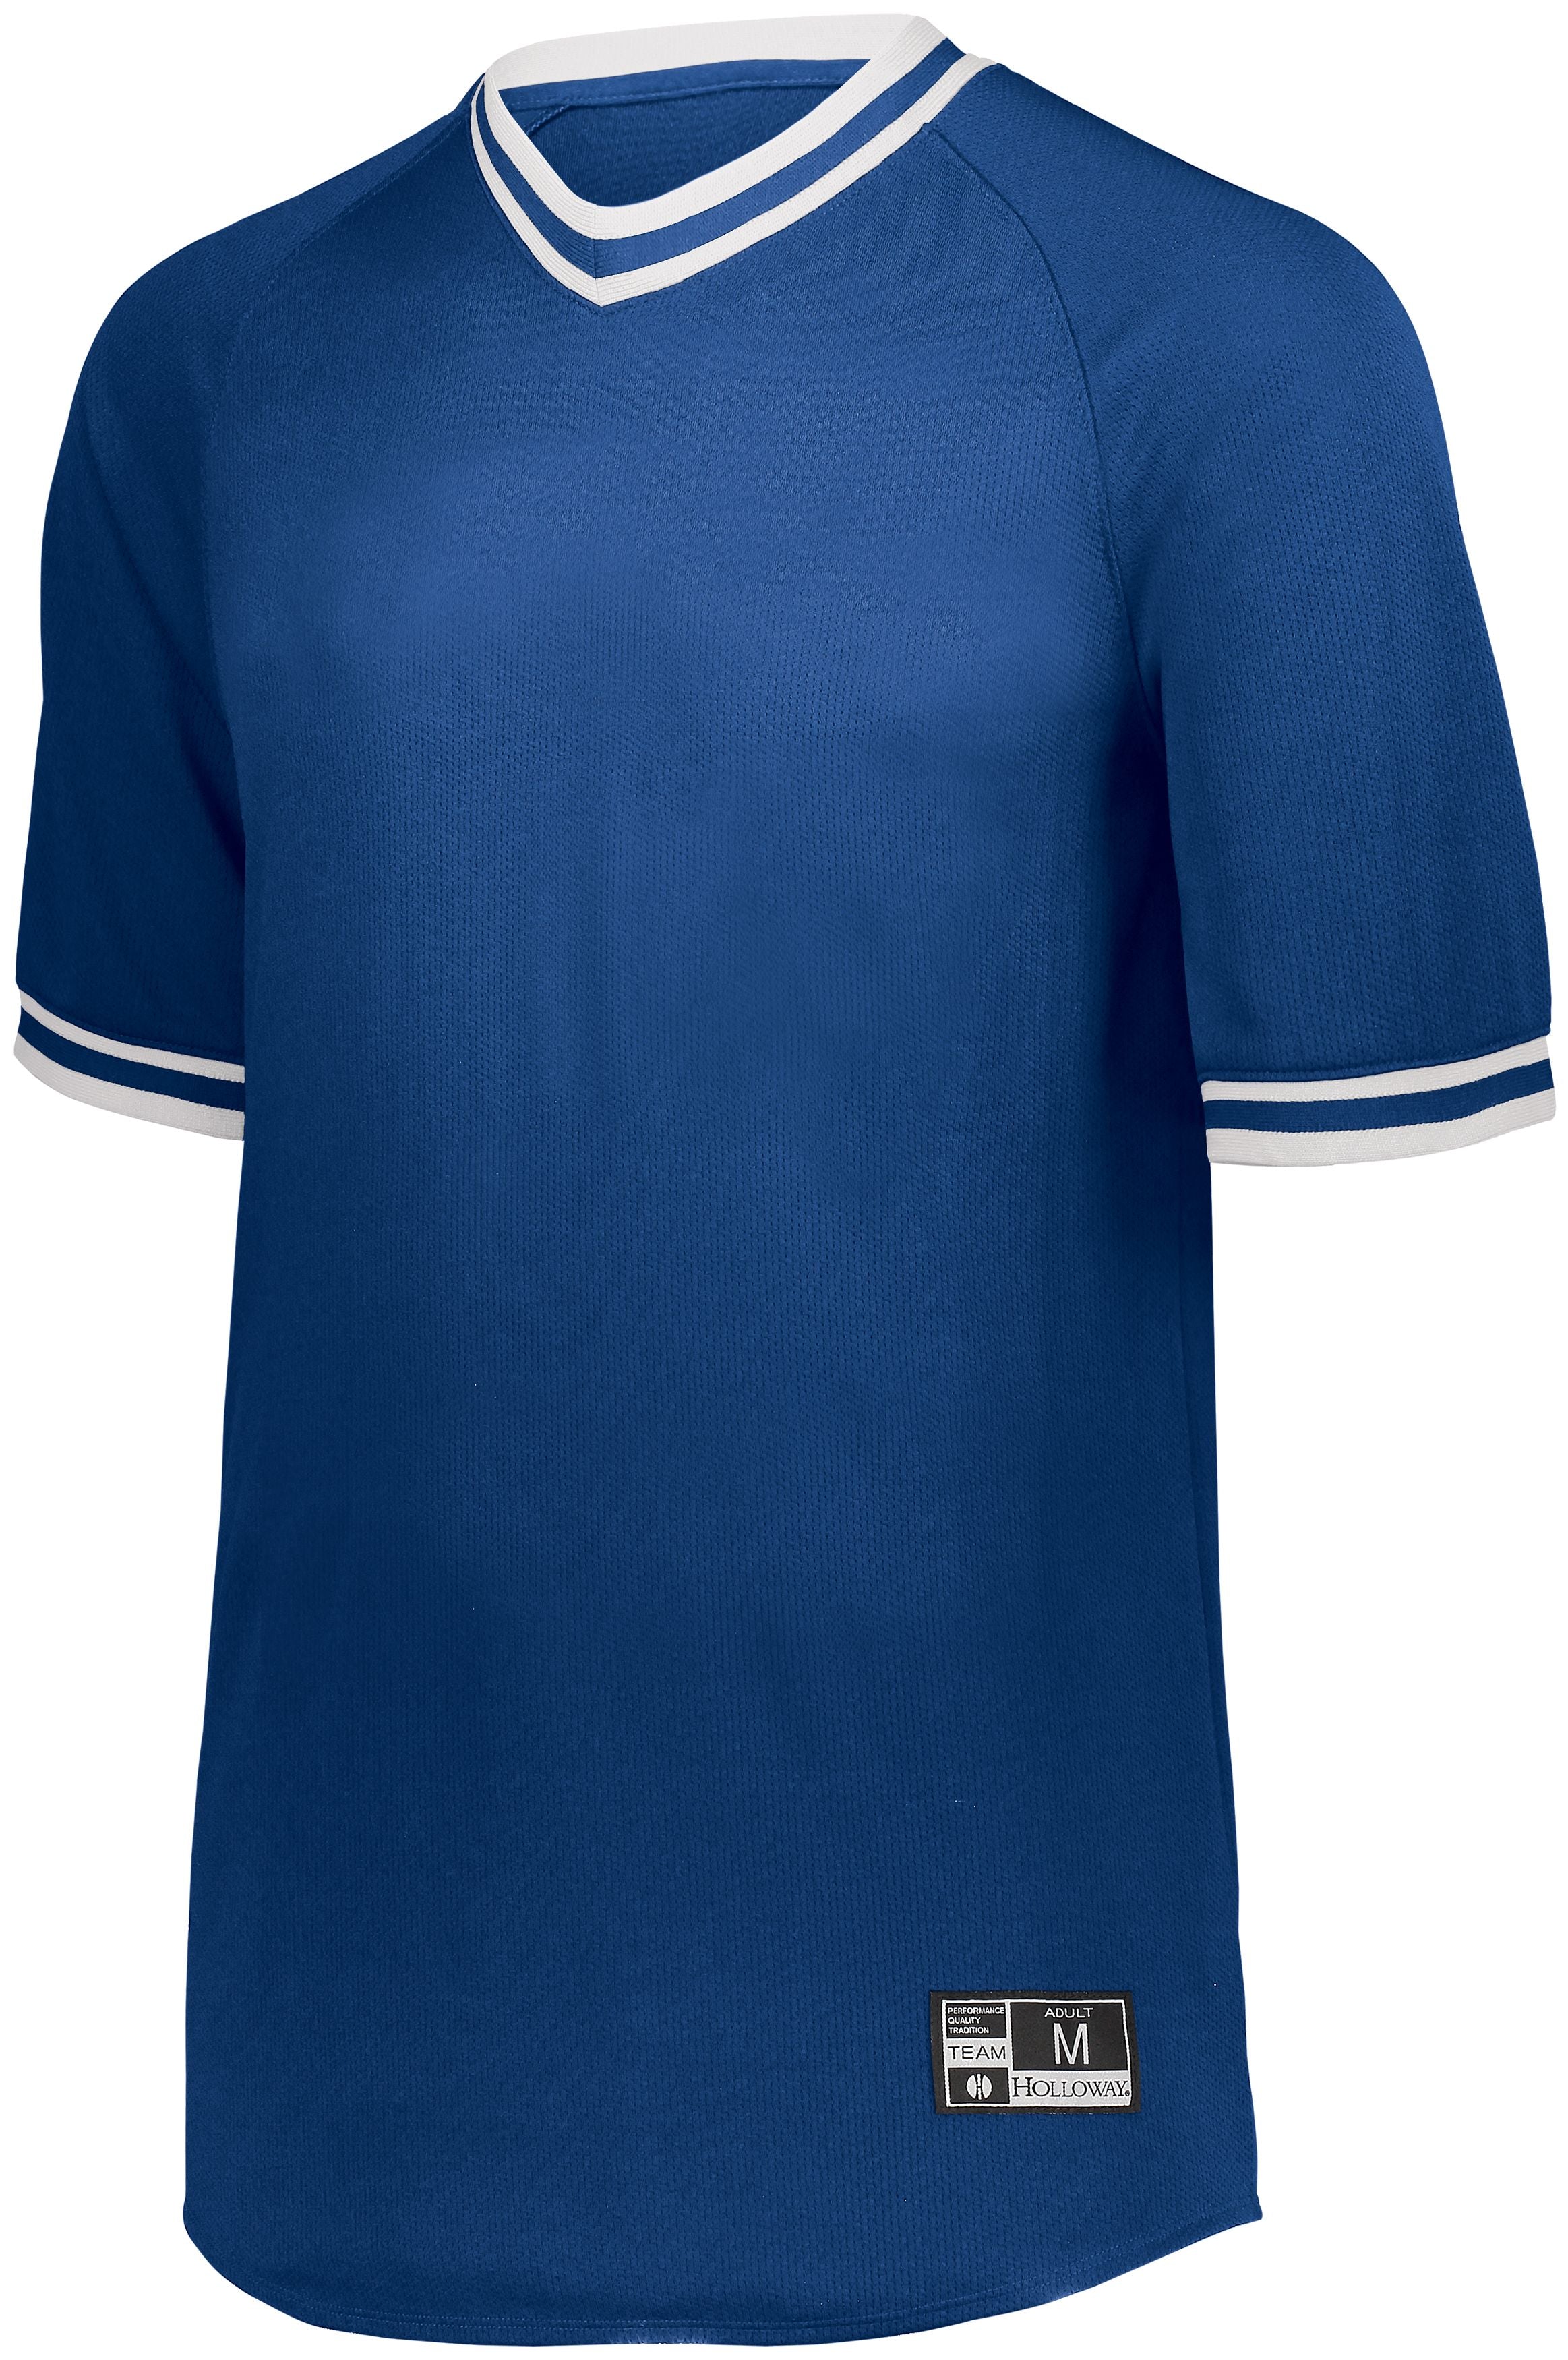 Holloway Retro V-Neck Baseball Jersey in Royal/White  -Part of the Adult, Adult-Jersey, Baseball, Holloway, Shirts, All-Sports, All-Sports-1 product lines at KanaleyCreations.com